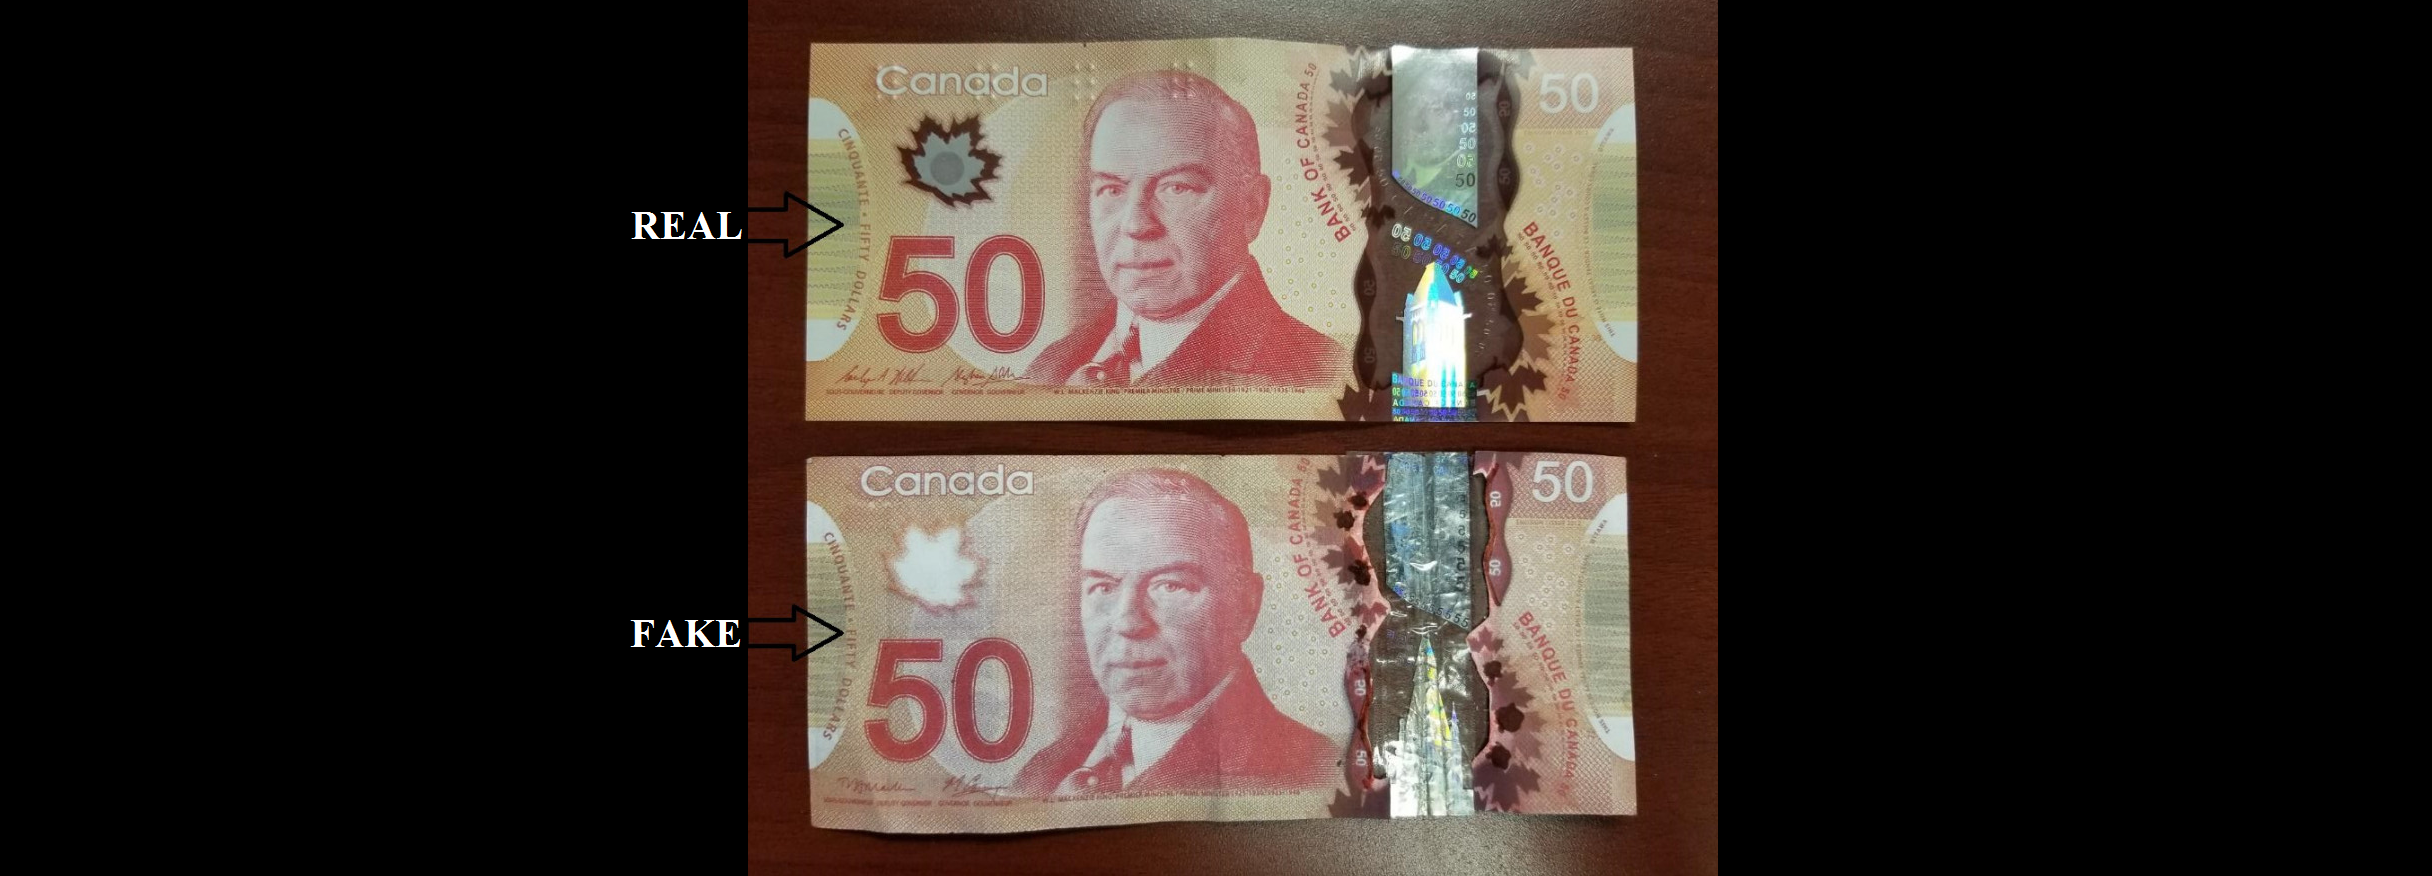 Fake 50 Bills Circulating Shediac Know What To Look For In Funny Money Blog K94 5